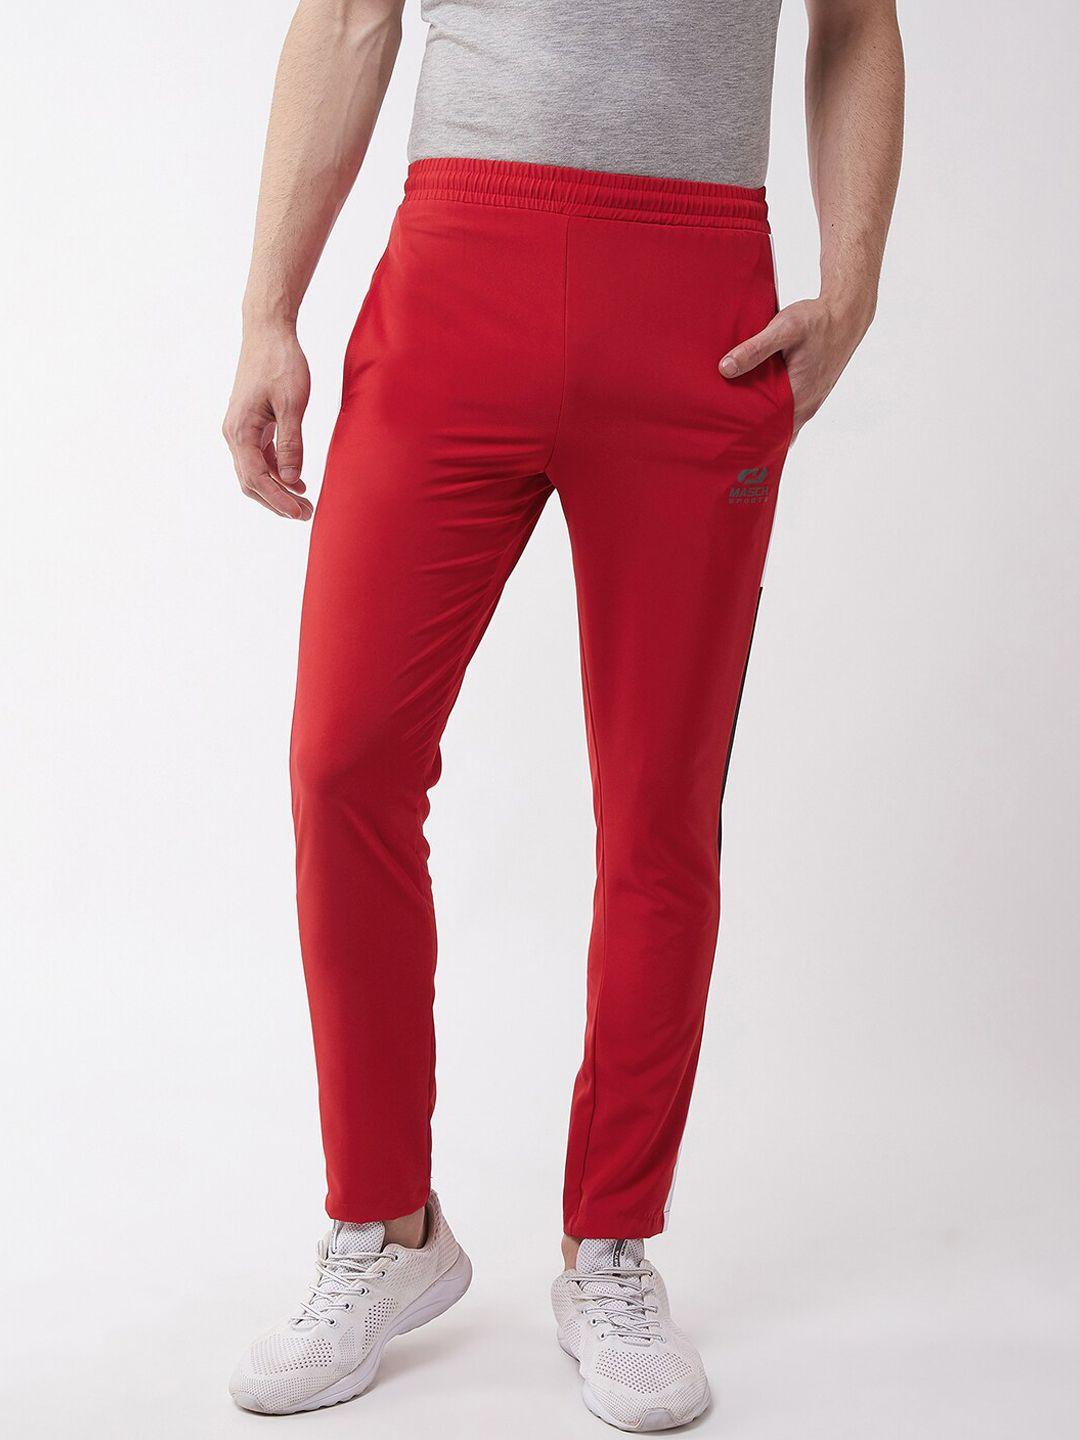 masch-sports-men-red-solid-track-pants